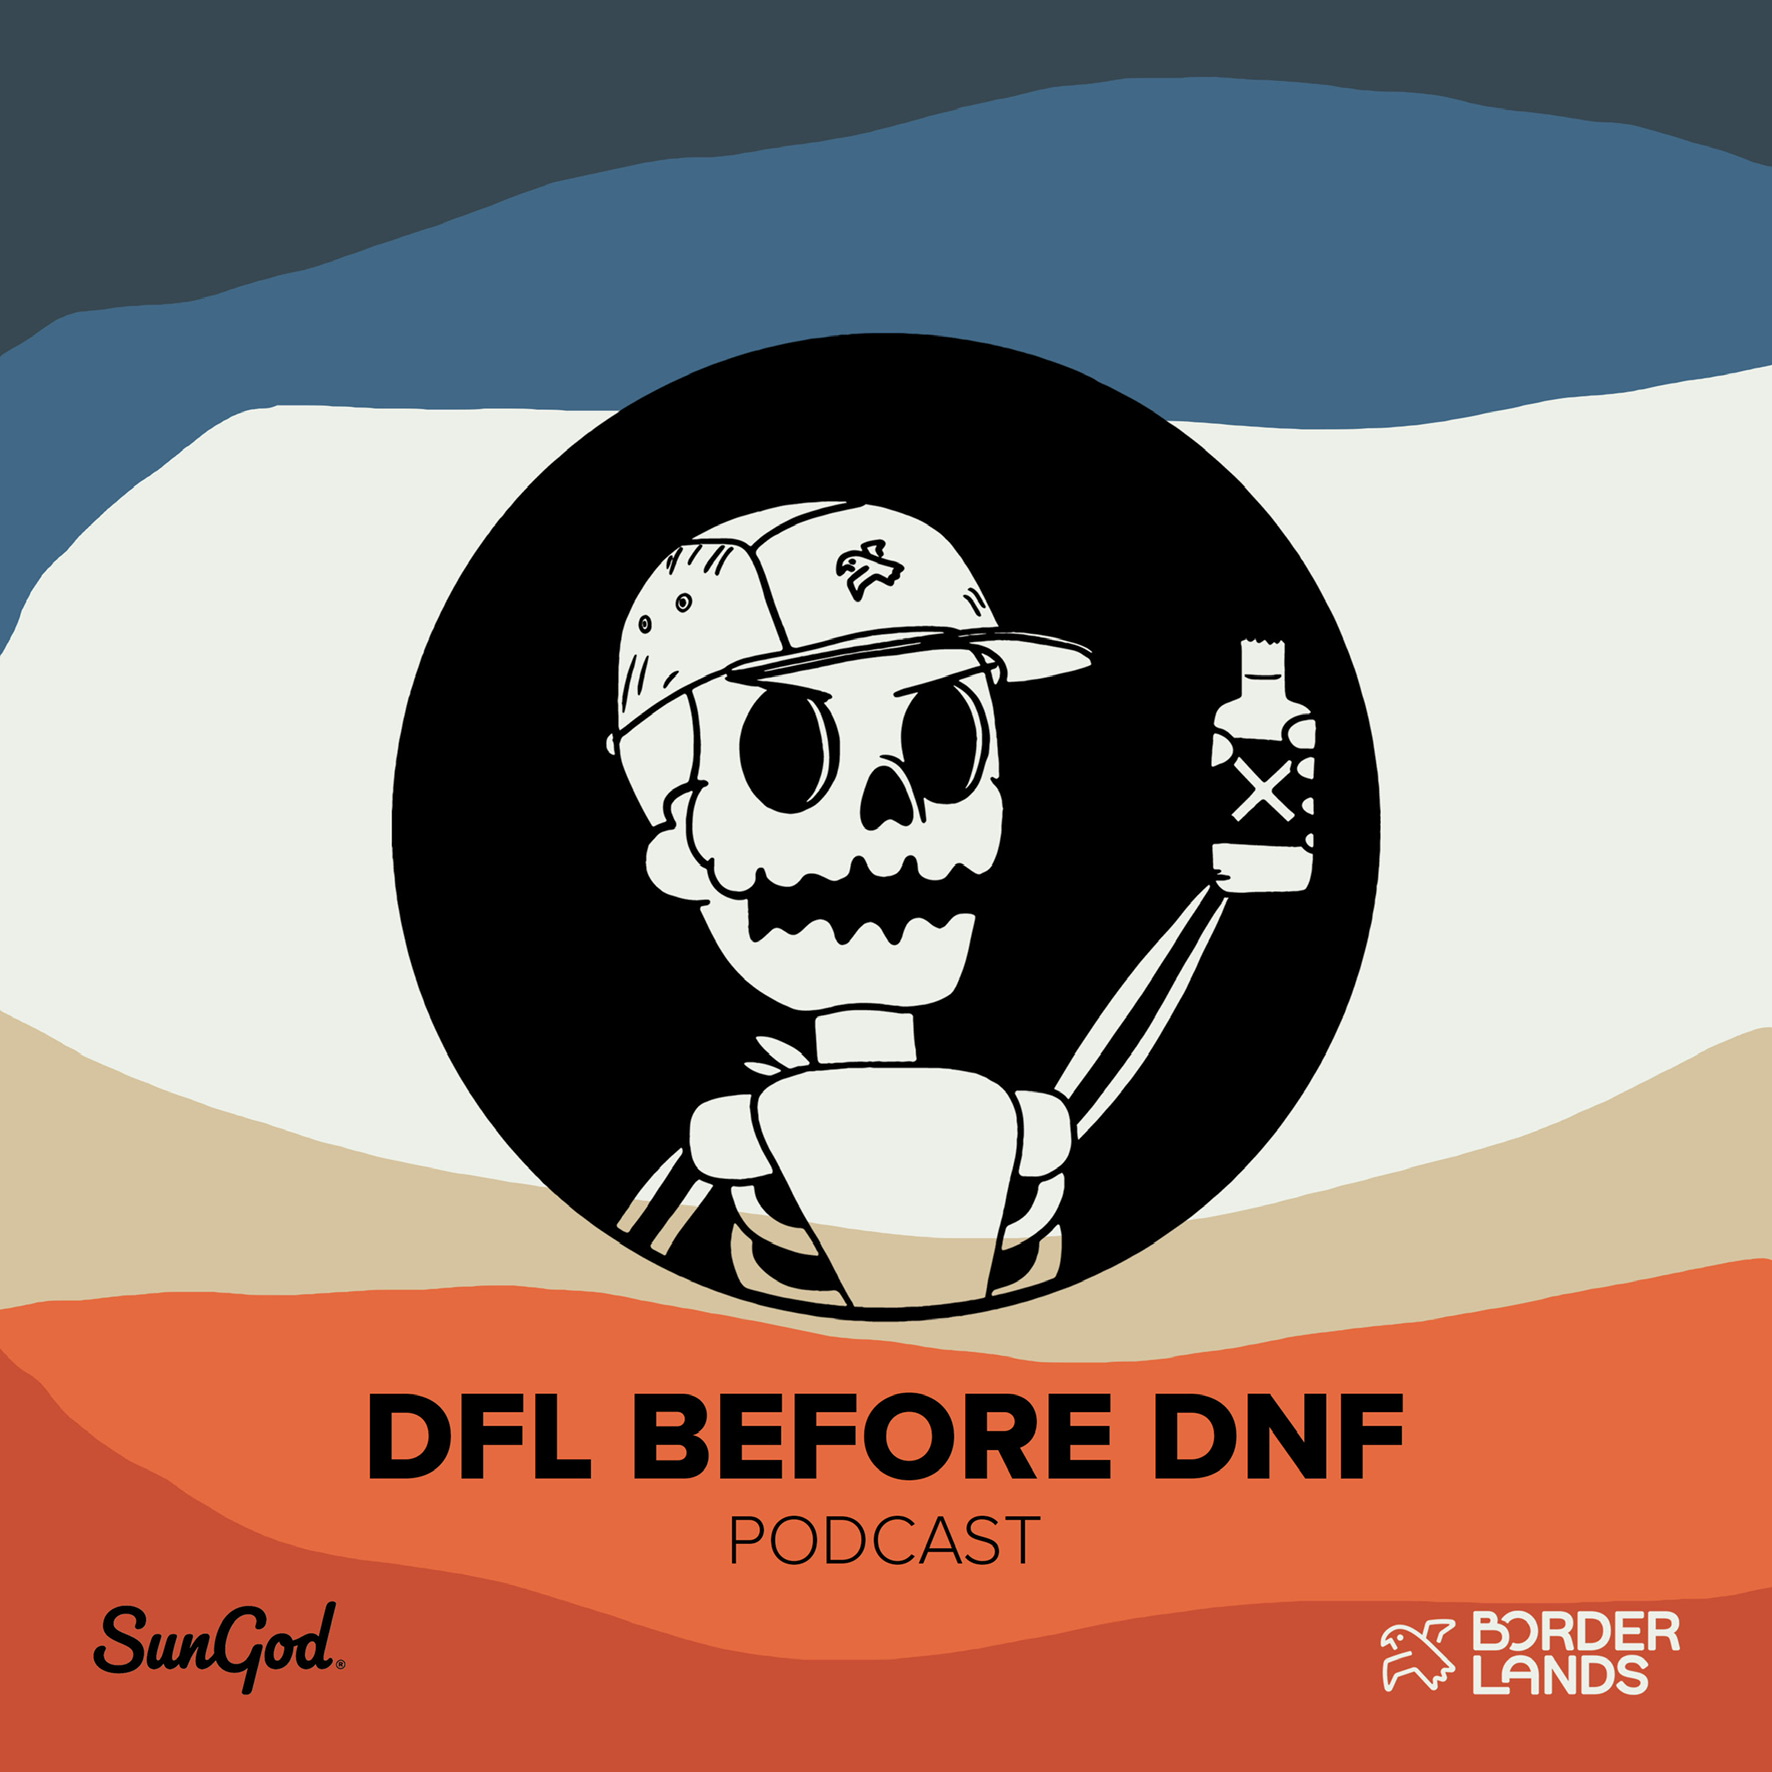 Apple - DFL BEFORE DNF PODCAST thumbnail